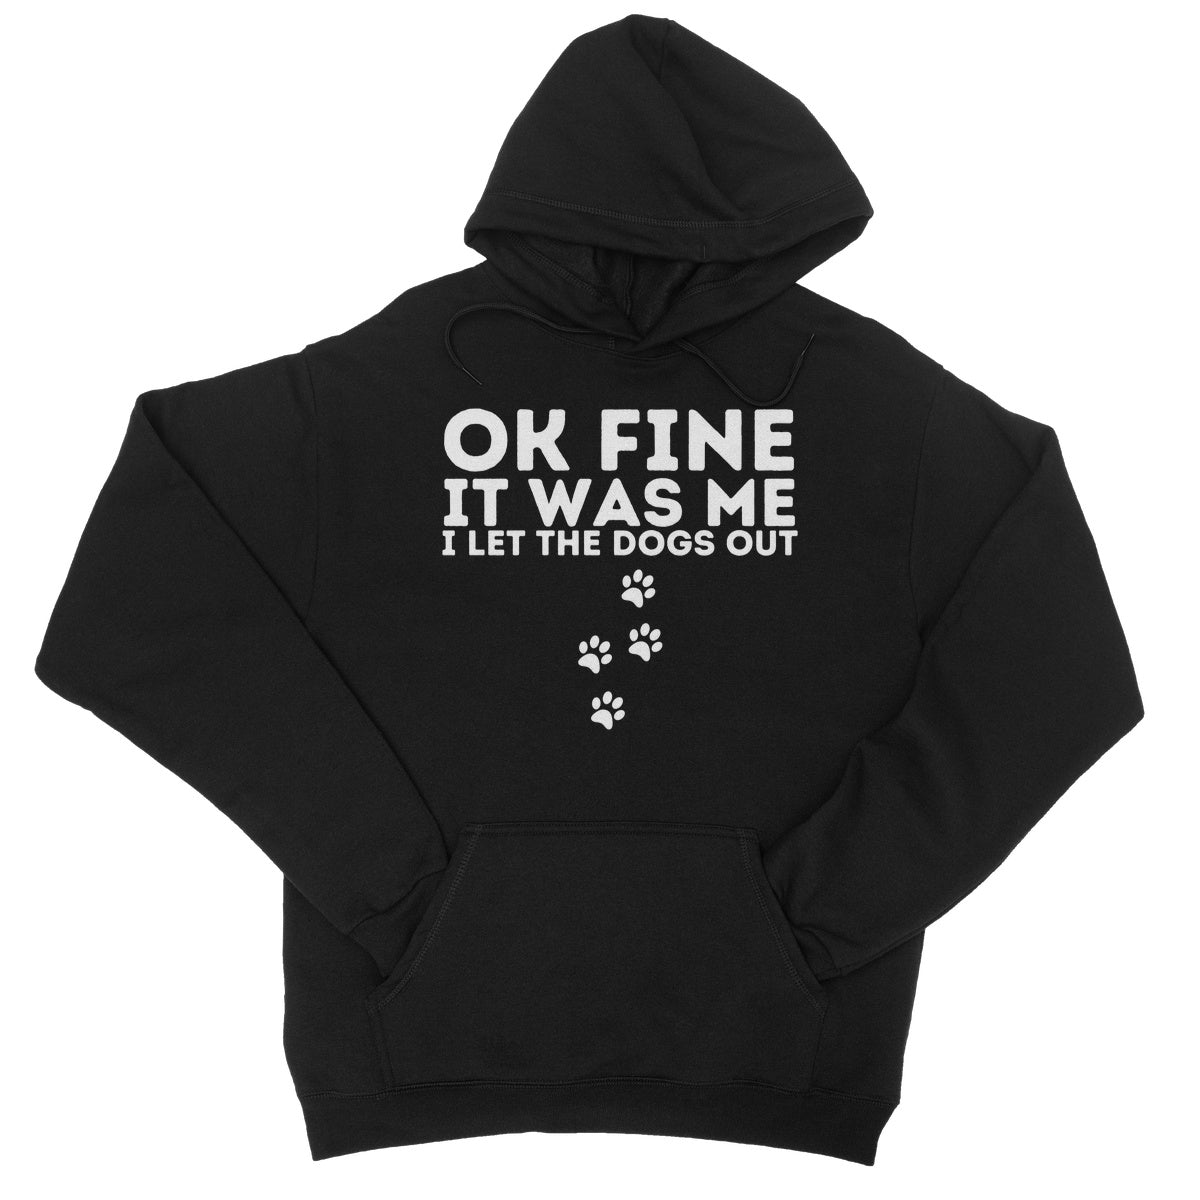 I let the dogs out hoodie black